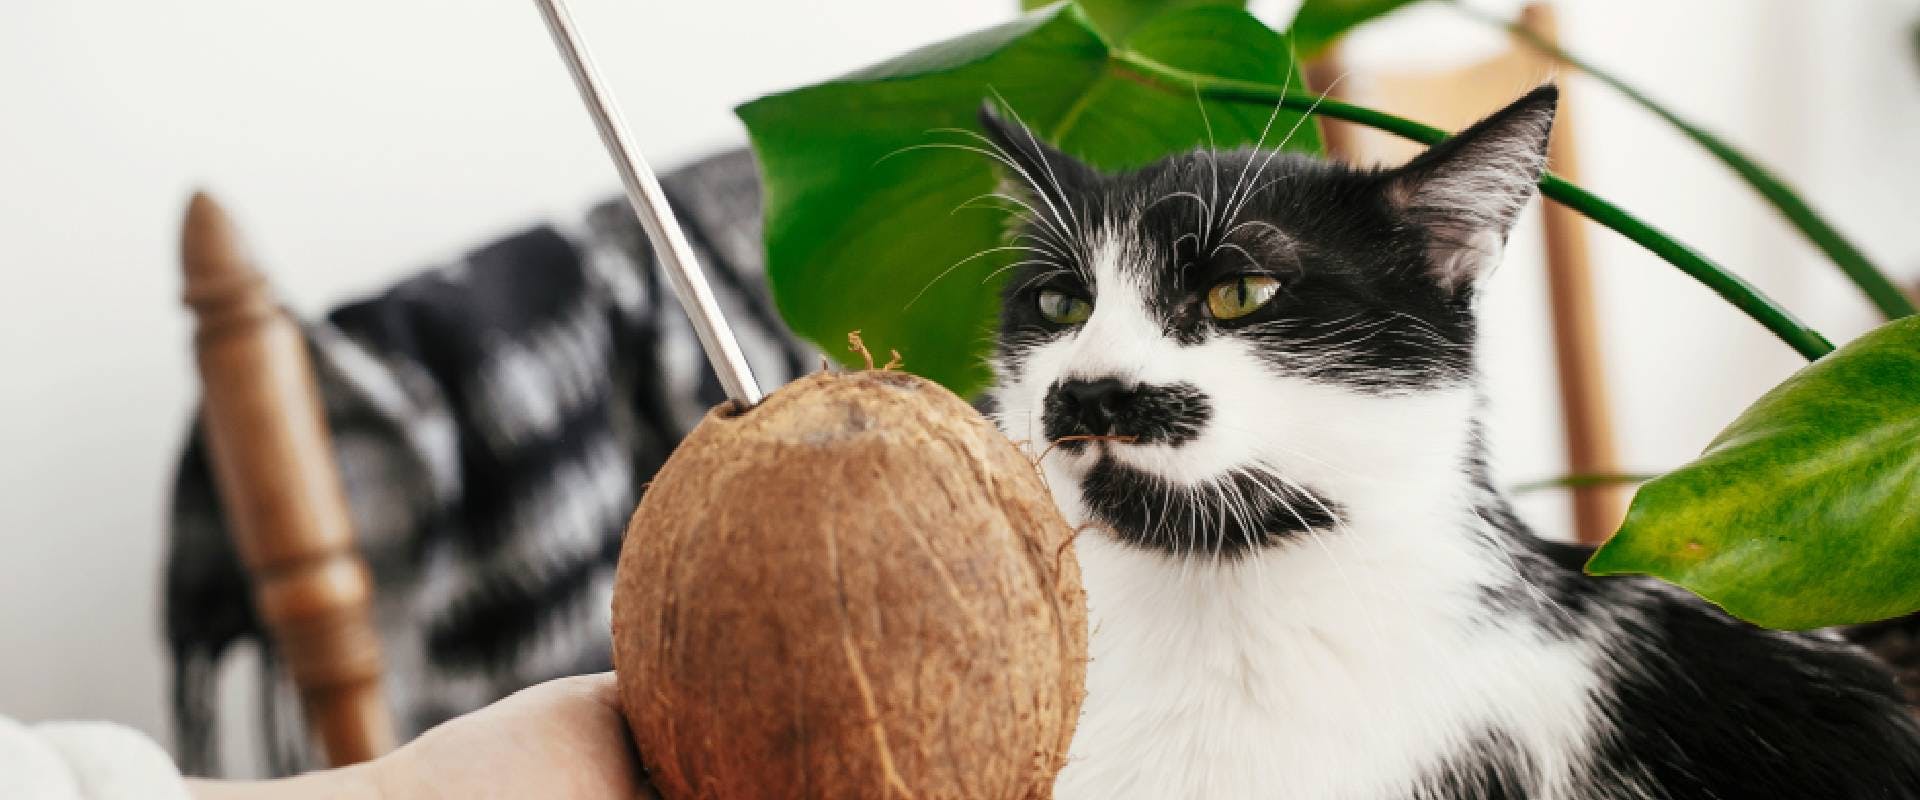 Someone holding up a coconut to a black and white cat